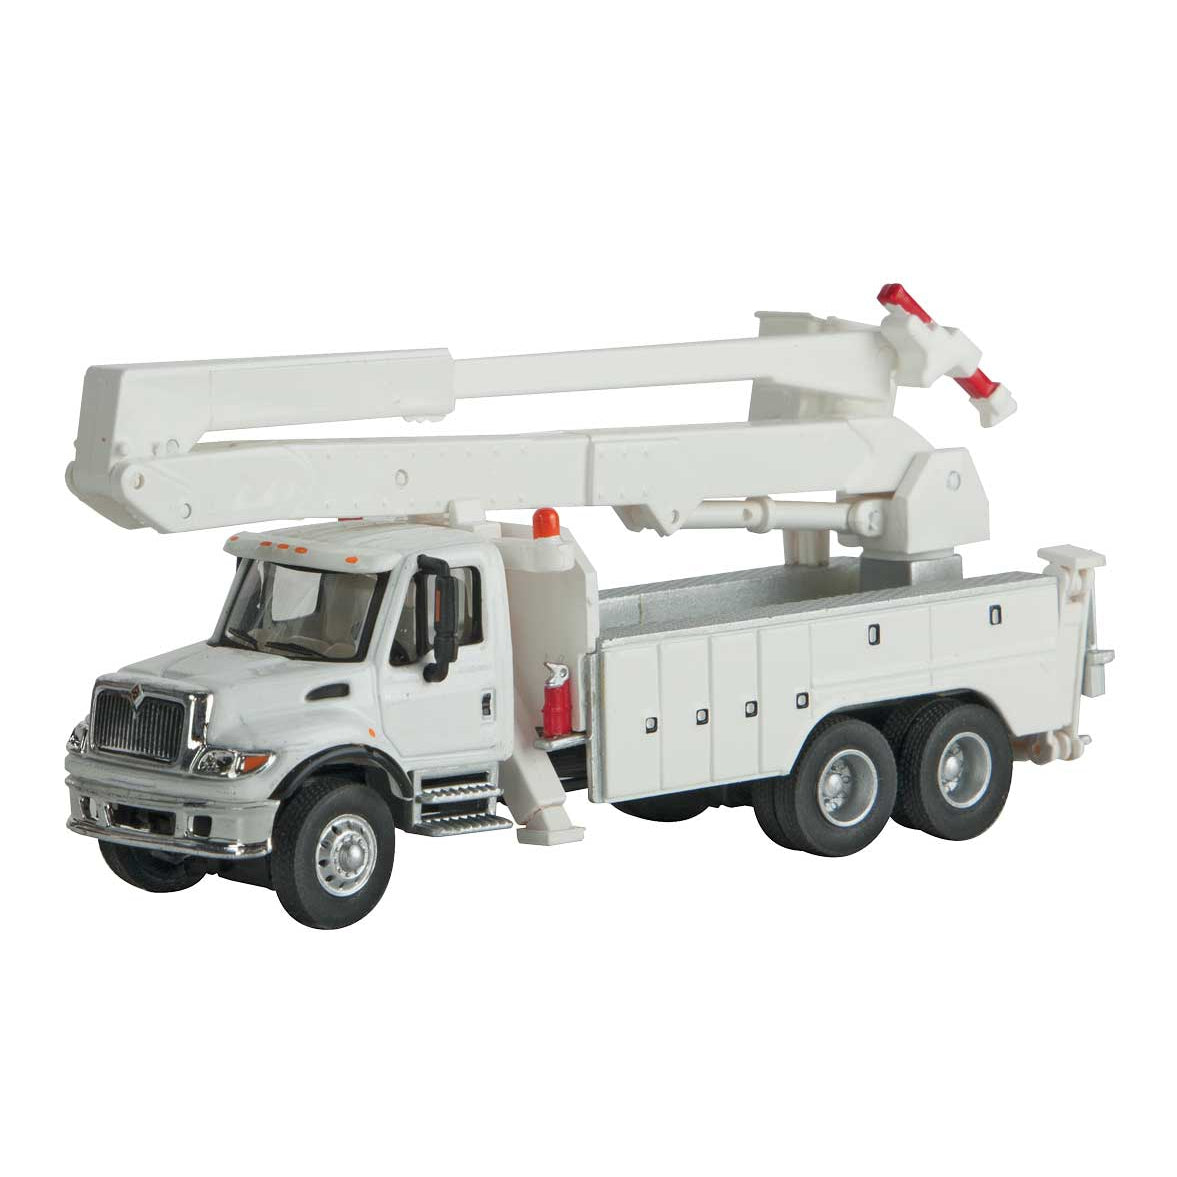 Walthers International(R) 7600 Utility Truck with Bucket Lift - Assembled -- White (Includes Utility Company Decals)